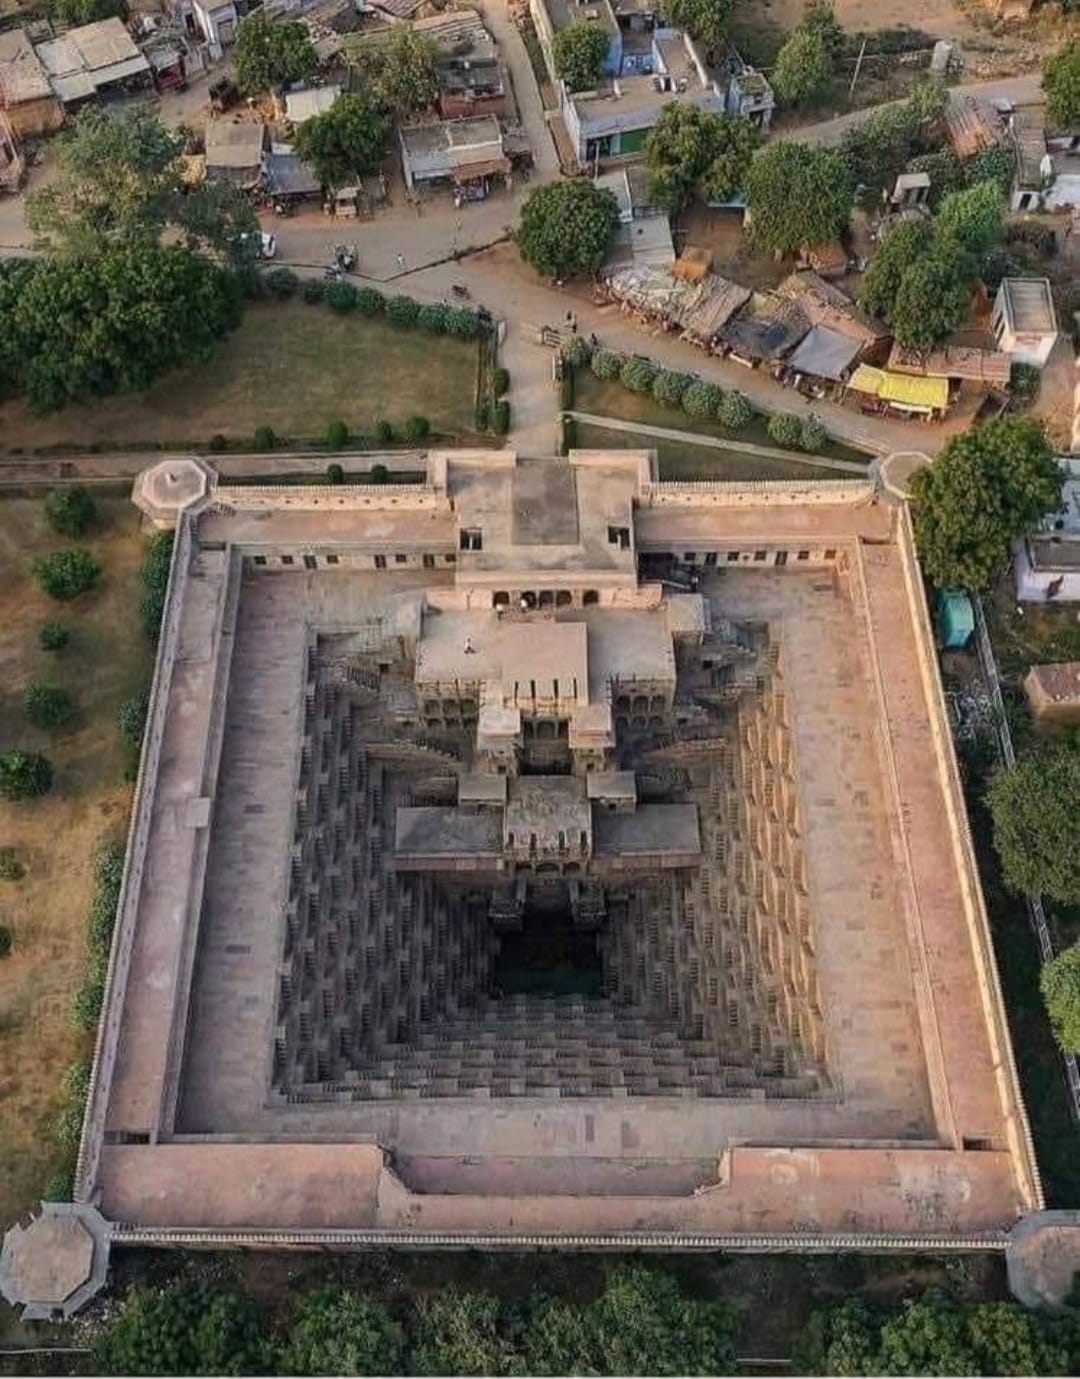 Built In The Abhaneri Village Of Rajasthan, India, It Is More Than 1,000 Years Old And Is 100 Feet Deep With 13 Floors And 3,500 Symmetrically Placed Thin Steps!